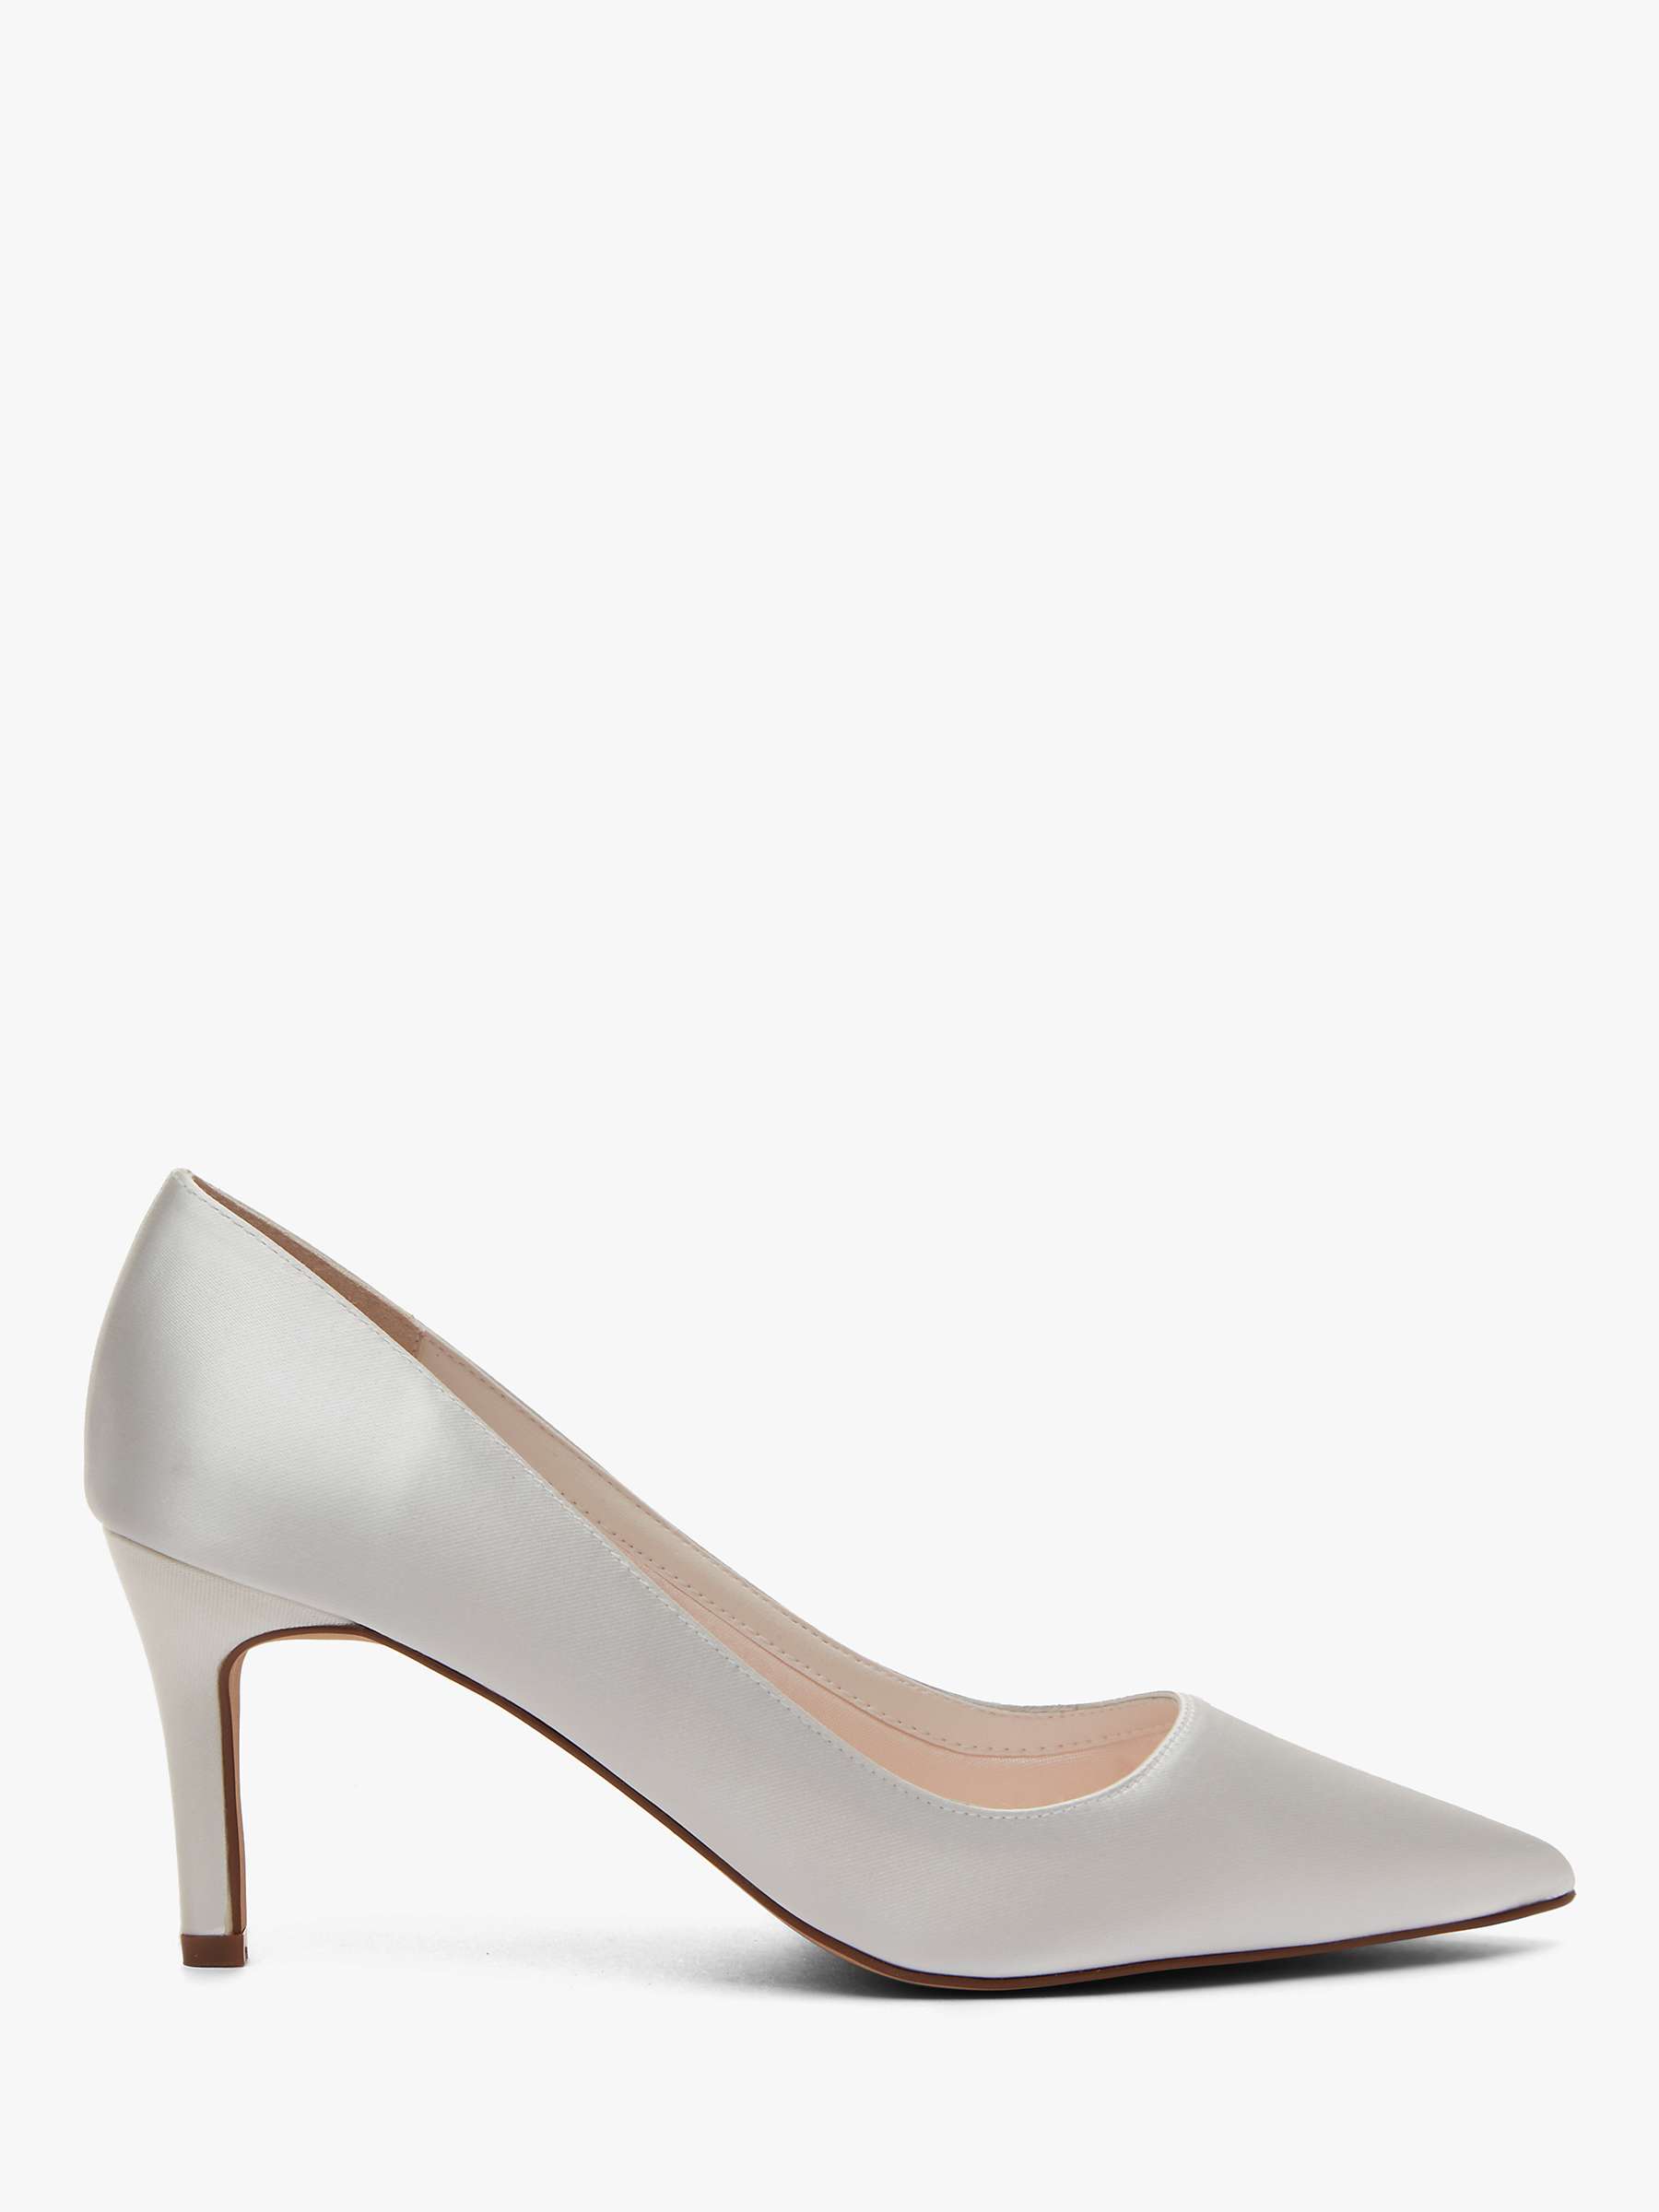 Buy Rainbow Club Morgan Satin Court Shoes, Ivory Online at johnlewis.com